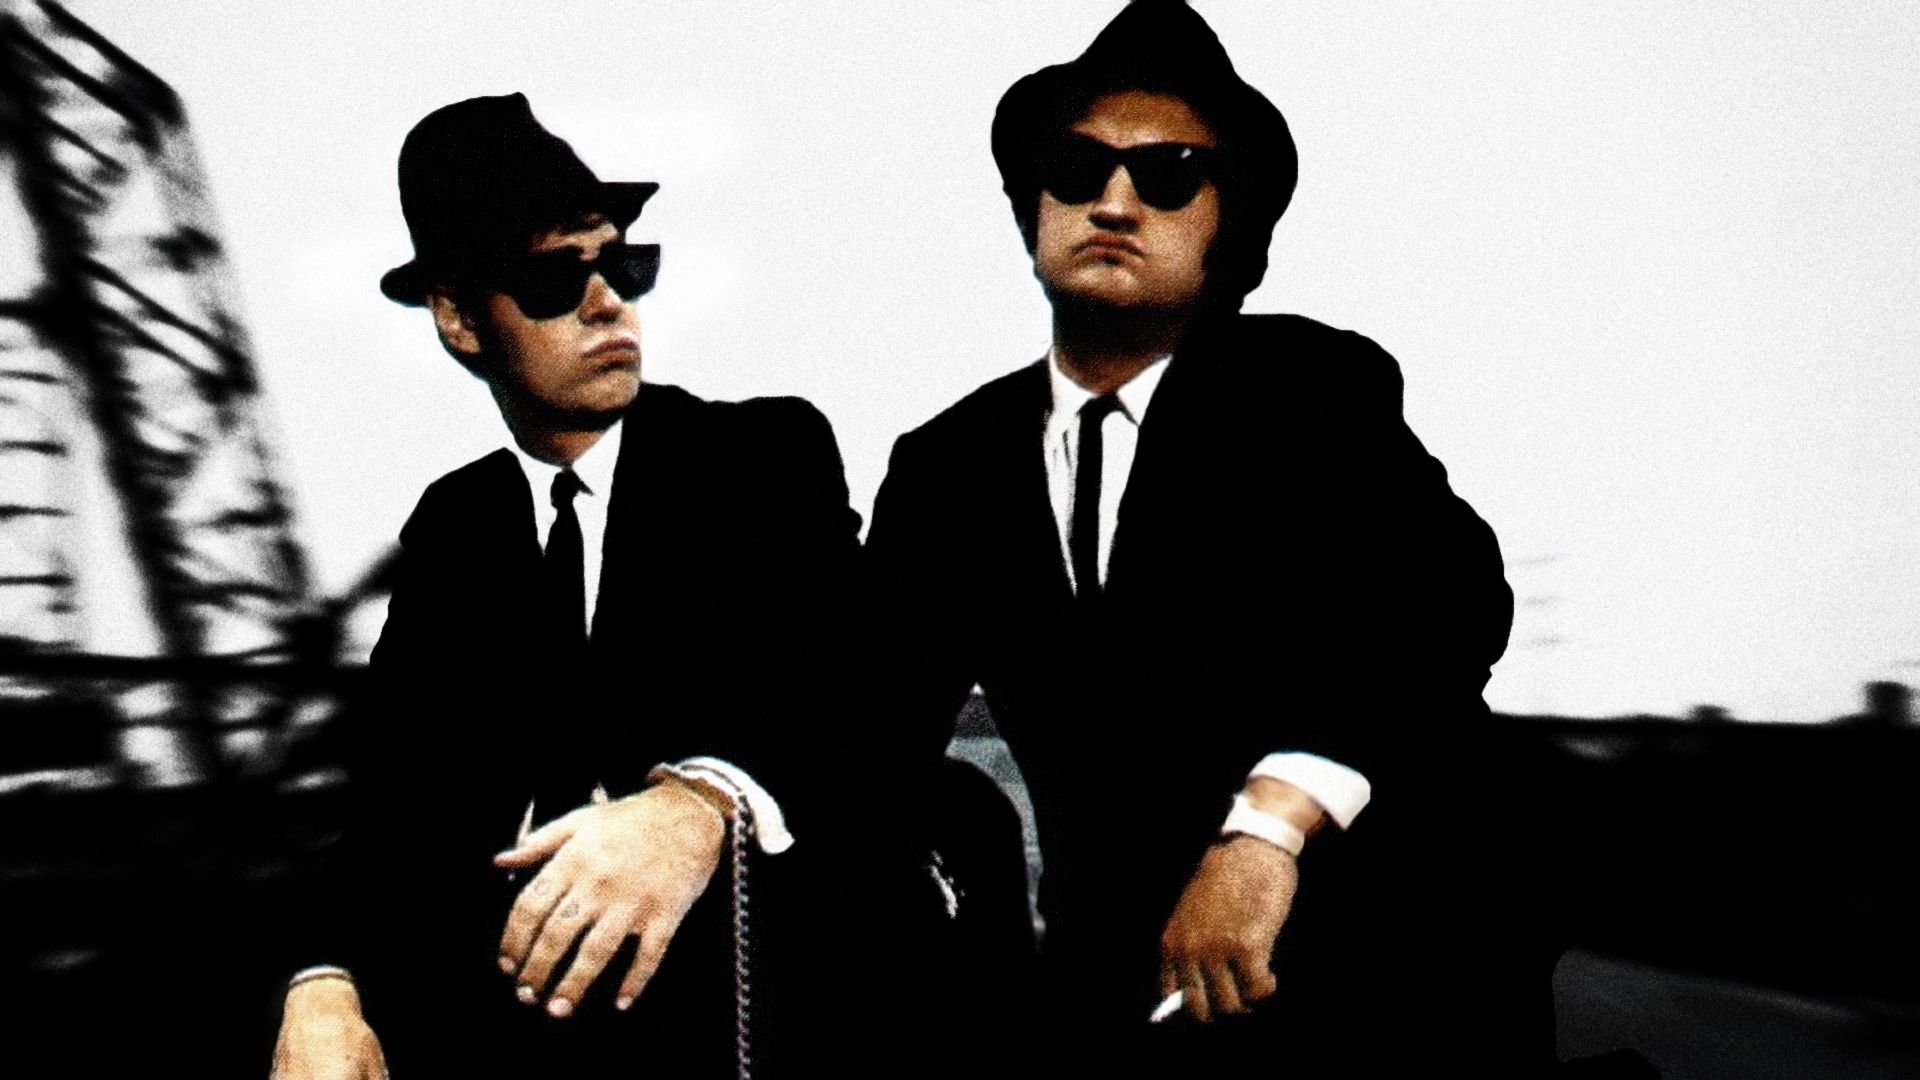 The Blues Brothers Computer Wallpapers, Desktop Backgrounds